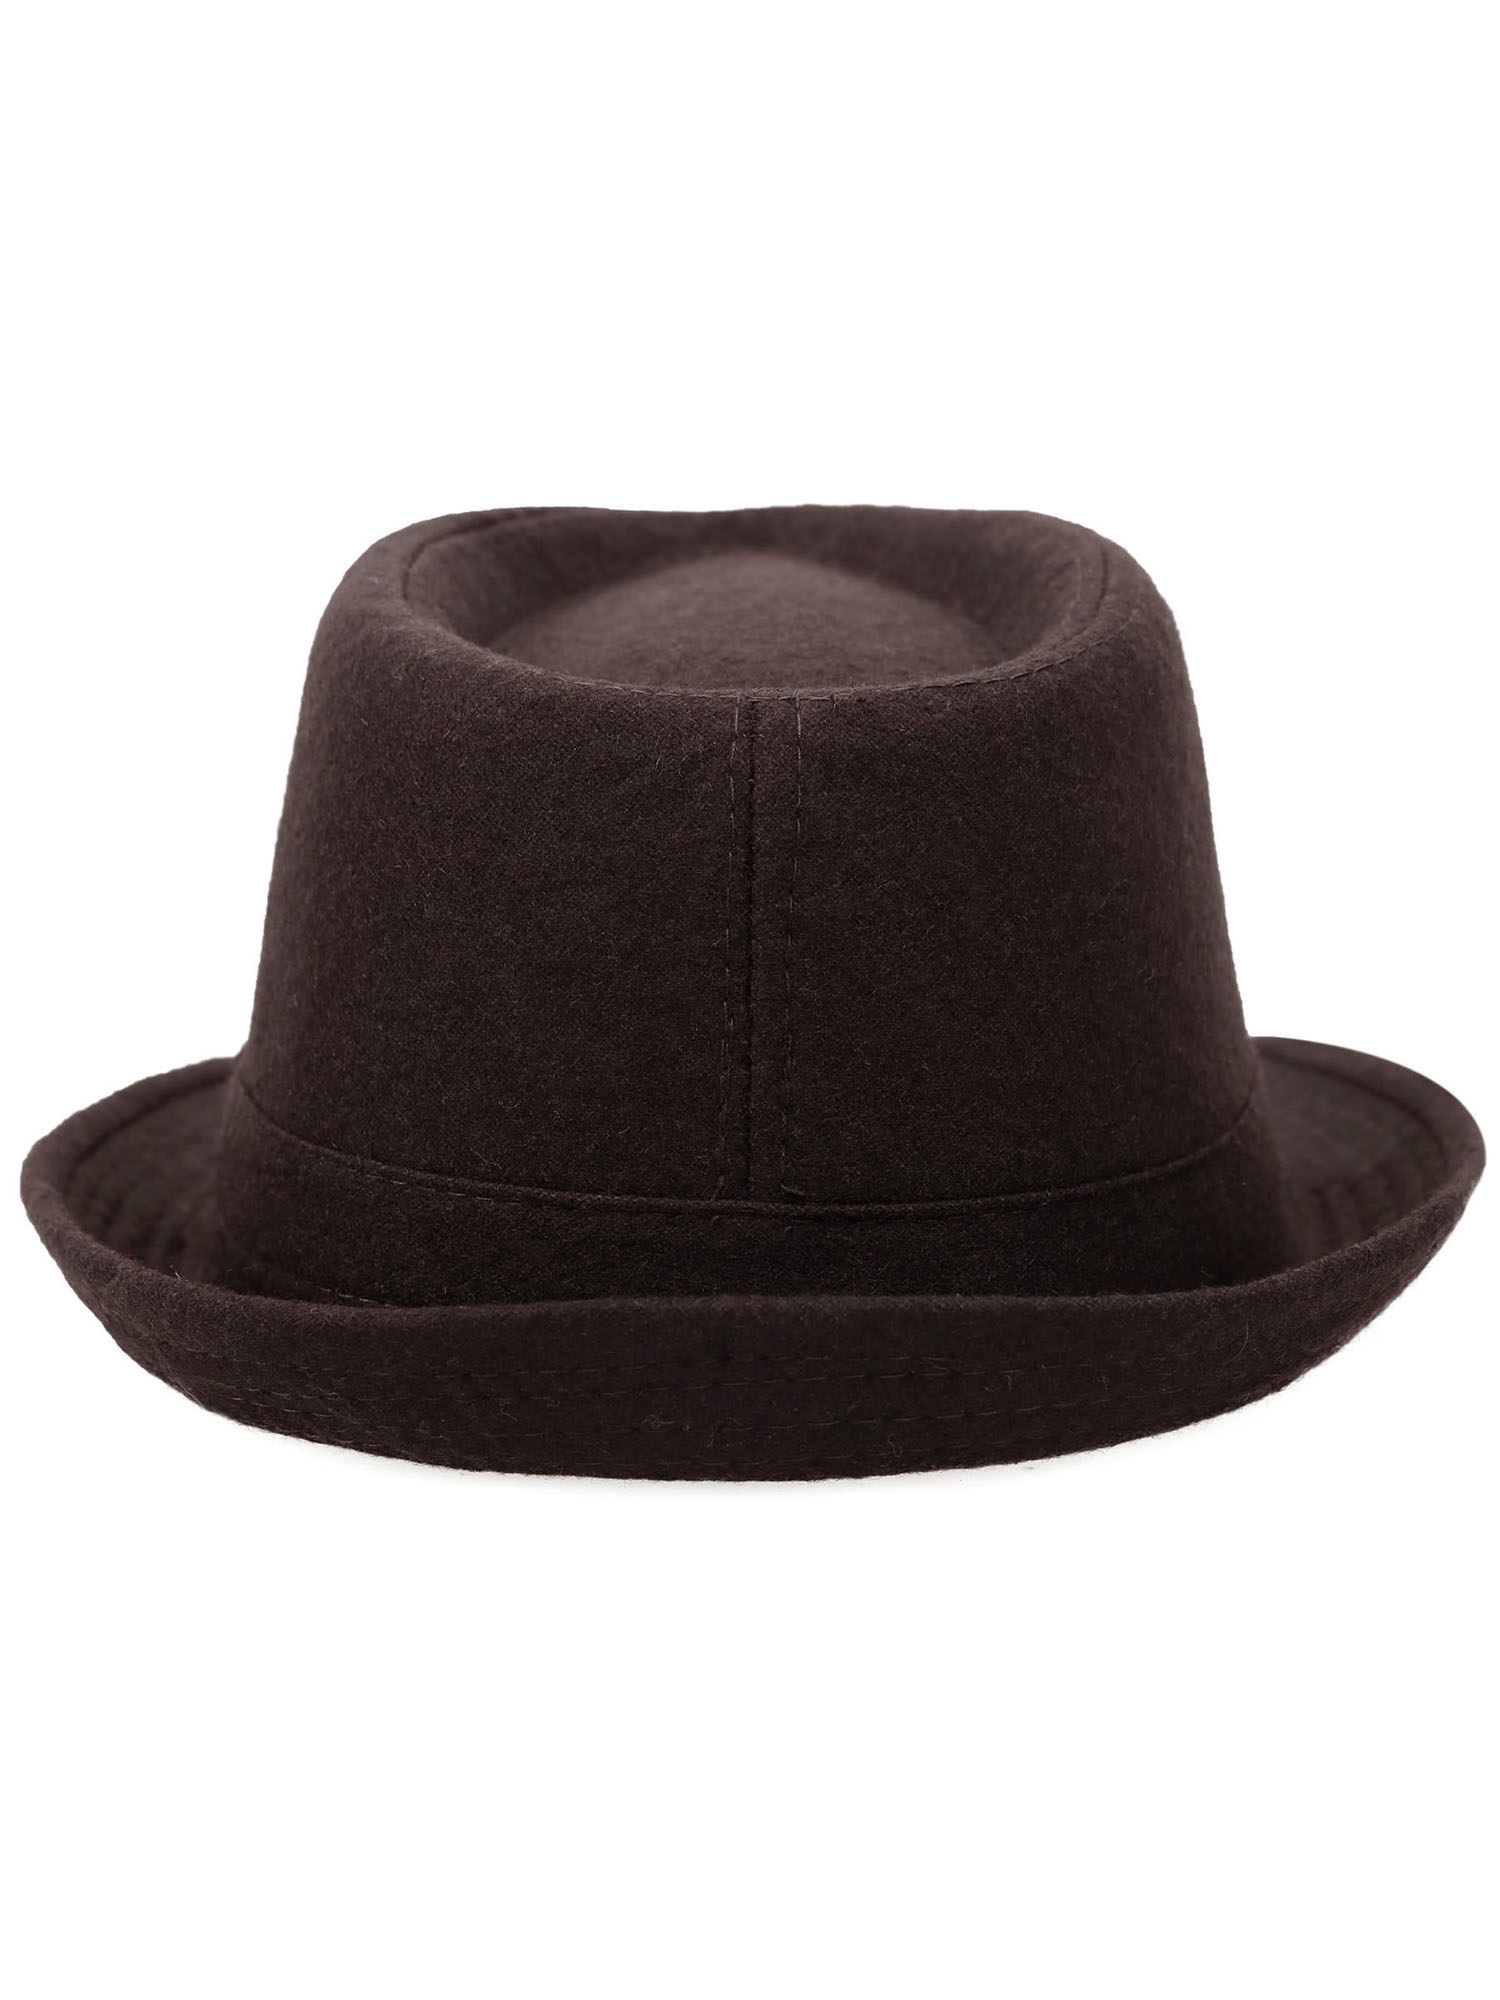 Simplicity Indiana Men's Adult Deluxe Structured Fedora Hat, Brown - image 3 of 4